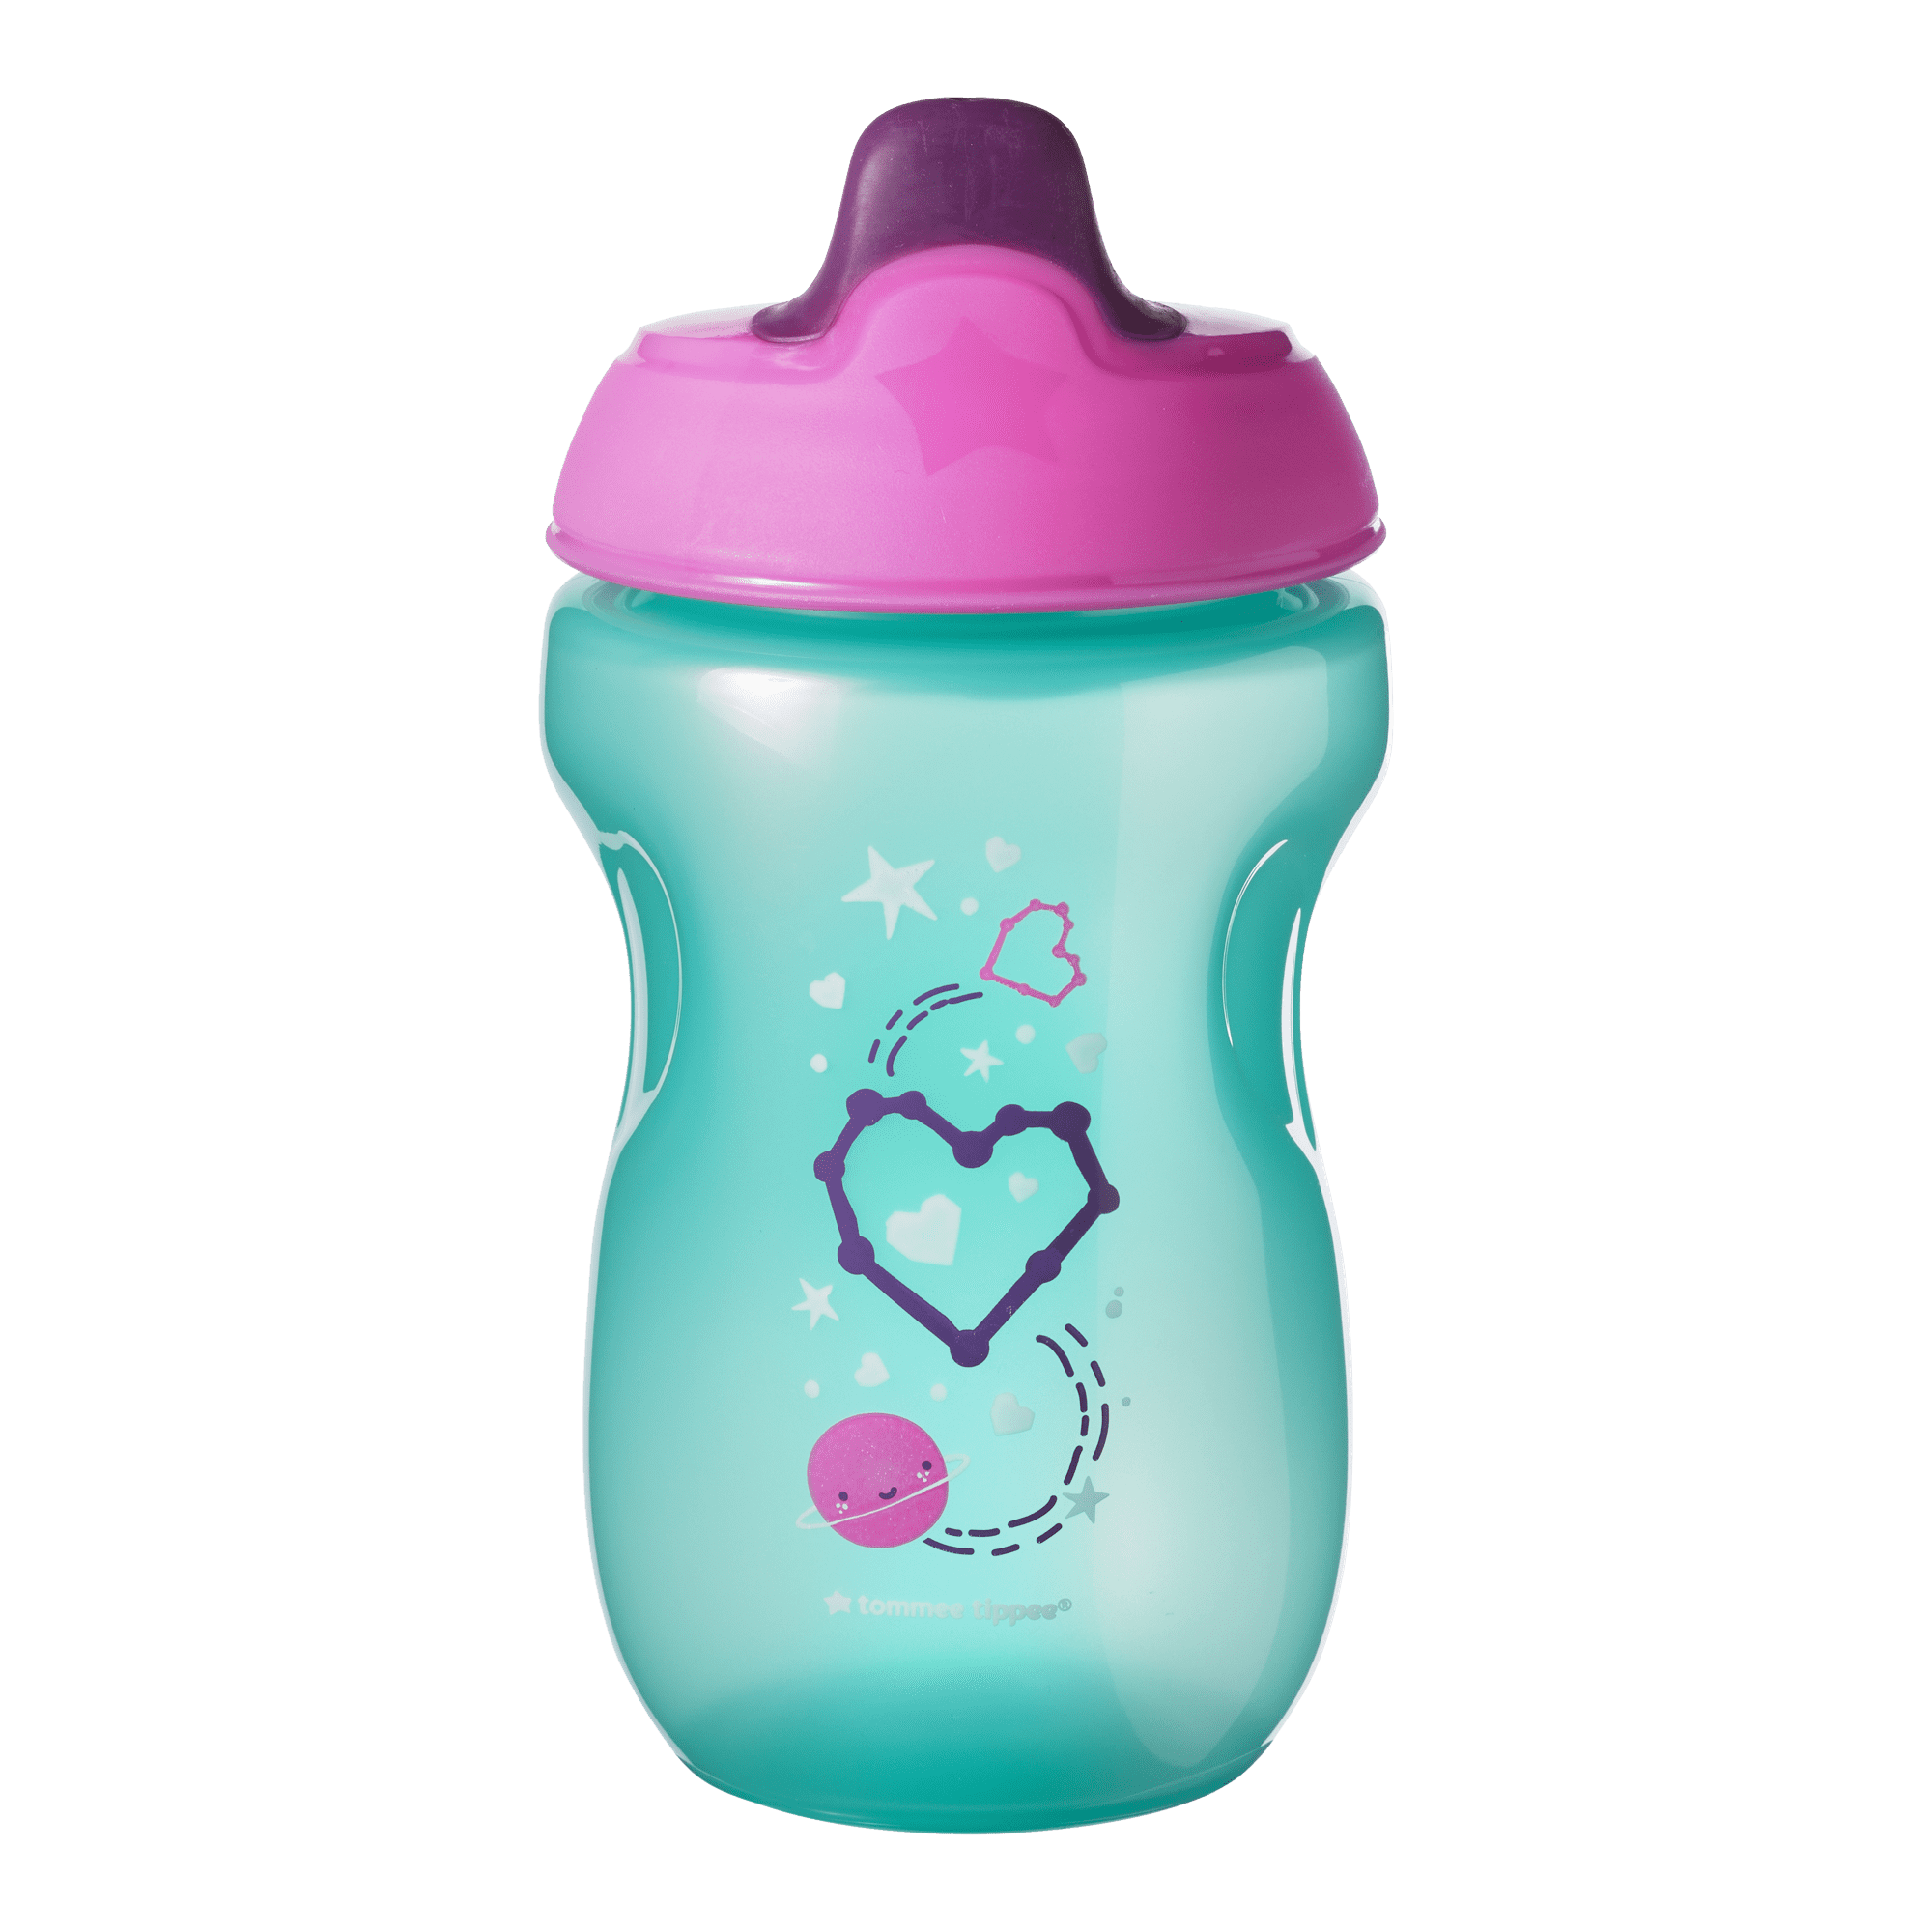 Tommee Tippee Hold Tight Baby Sippee Cup, 9+ months ? 10 ounces, 2